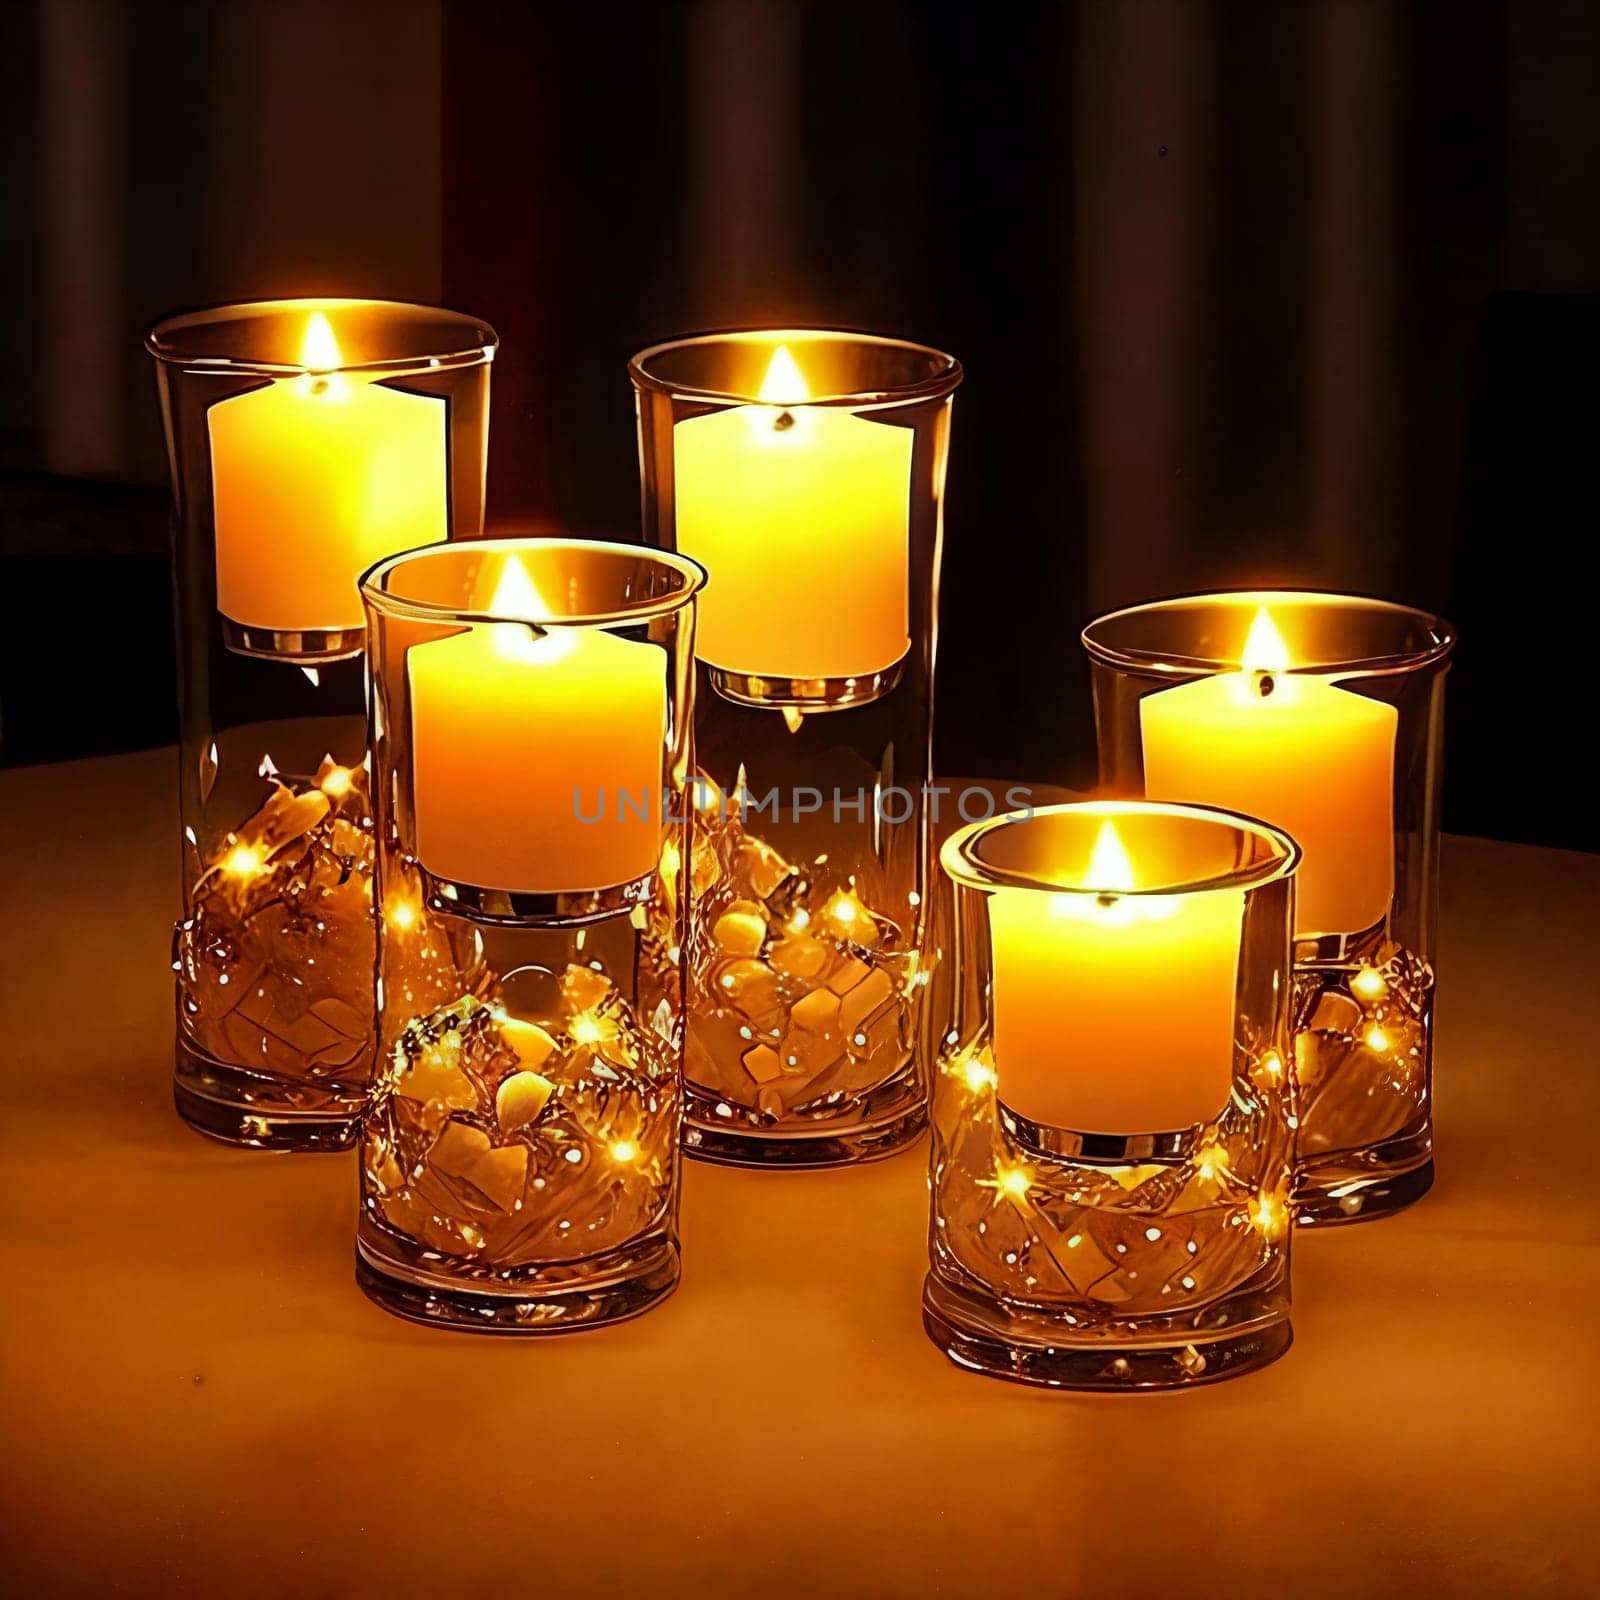 Cluster of decorative glass candle holders reflecting the warm glow of flickering candles. by GoodOlga